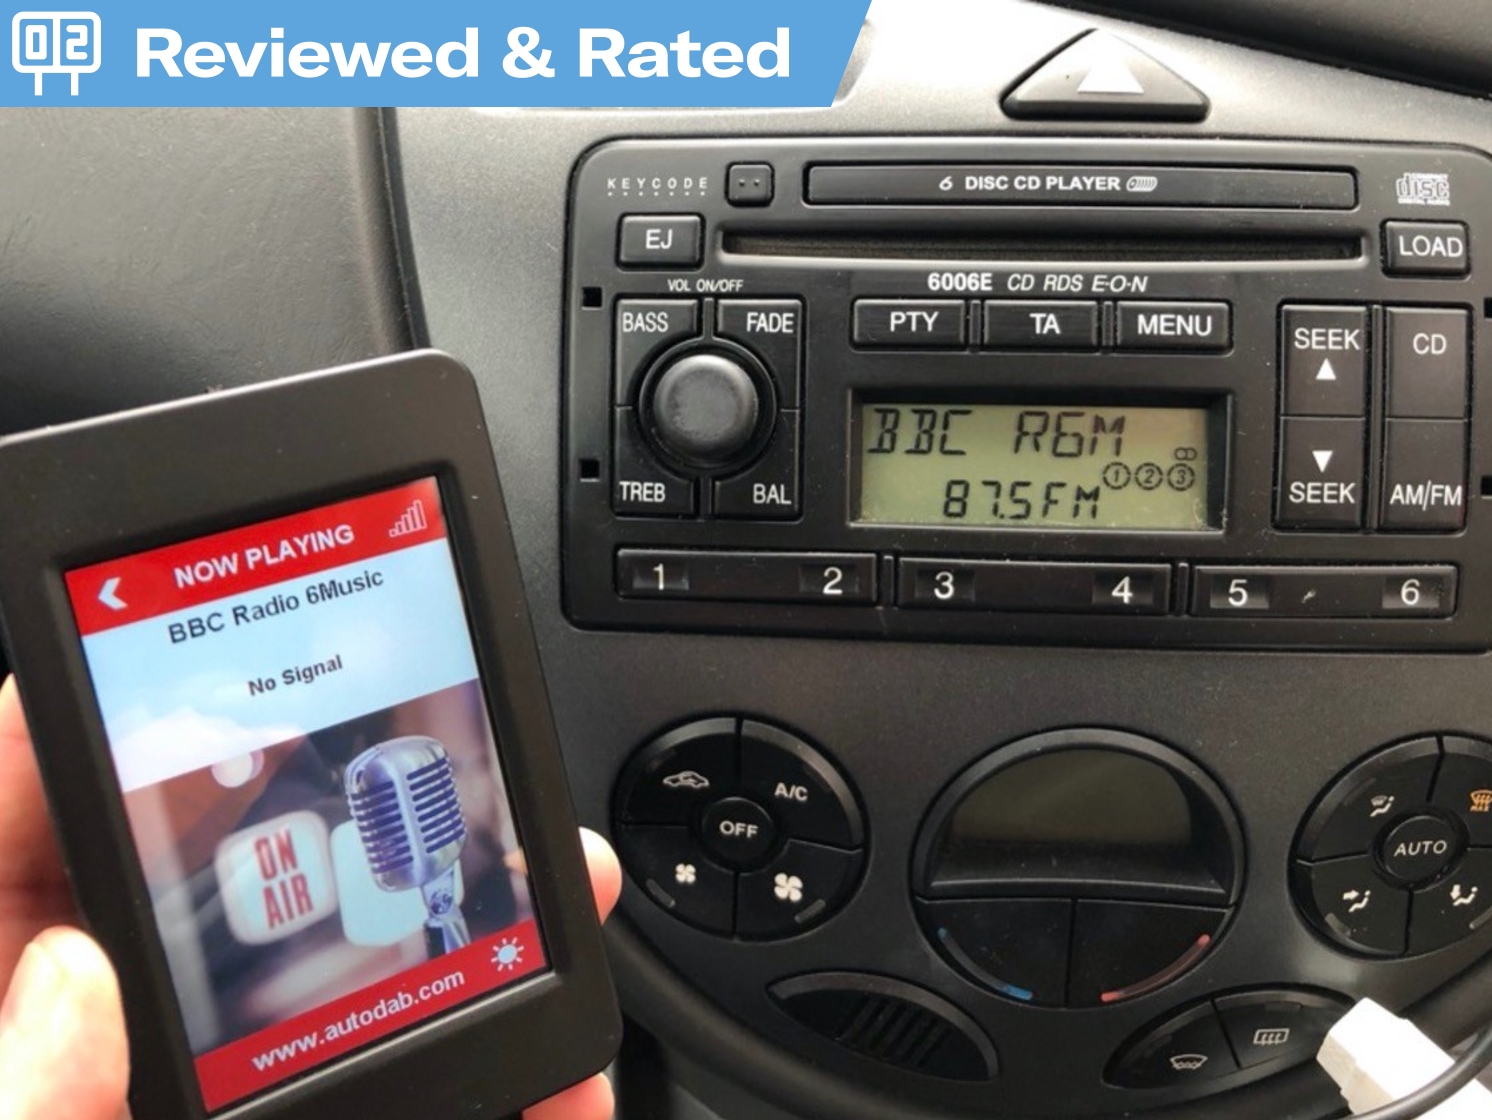 Reviewed & Rated: DAB adaptors for classic cars